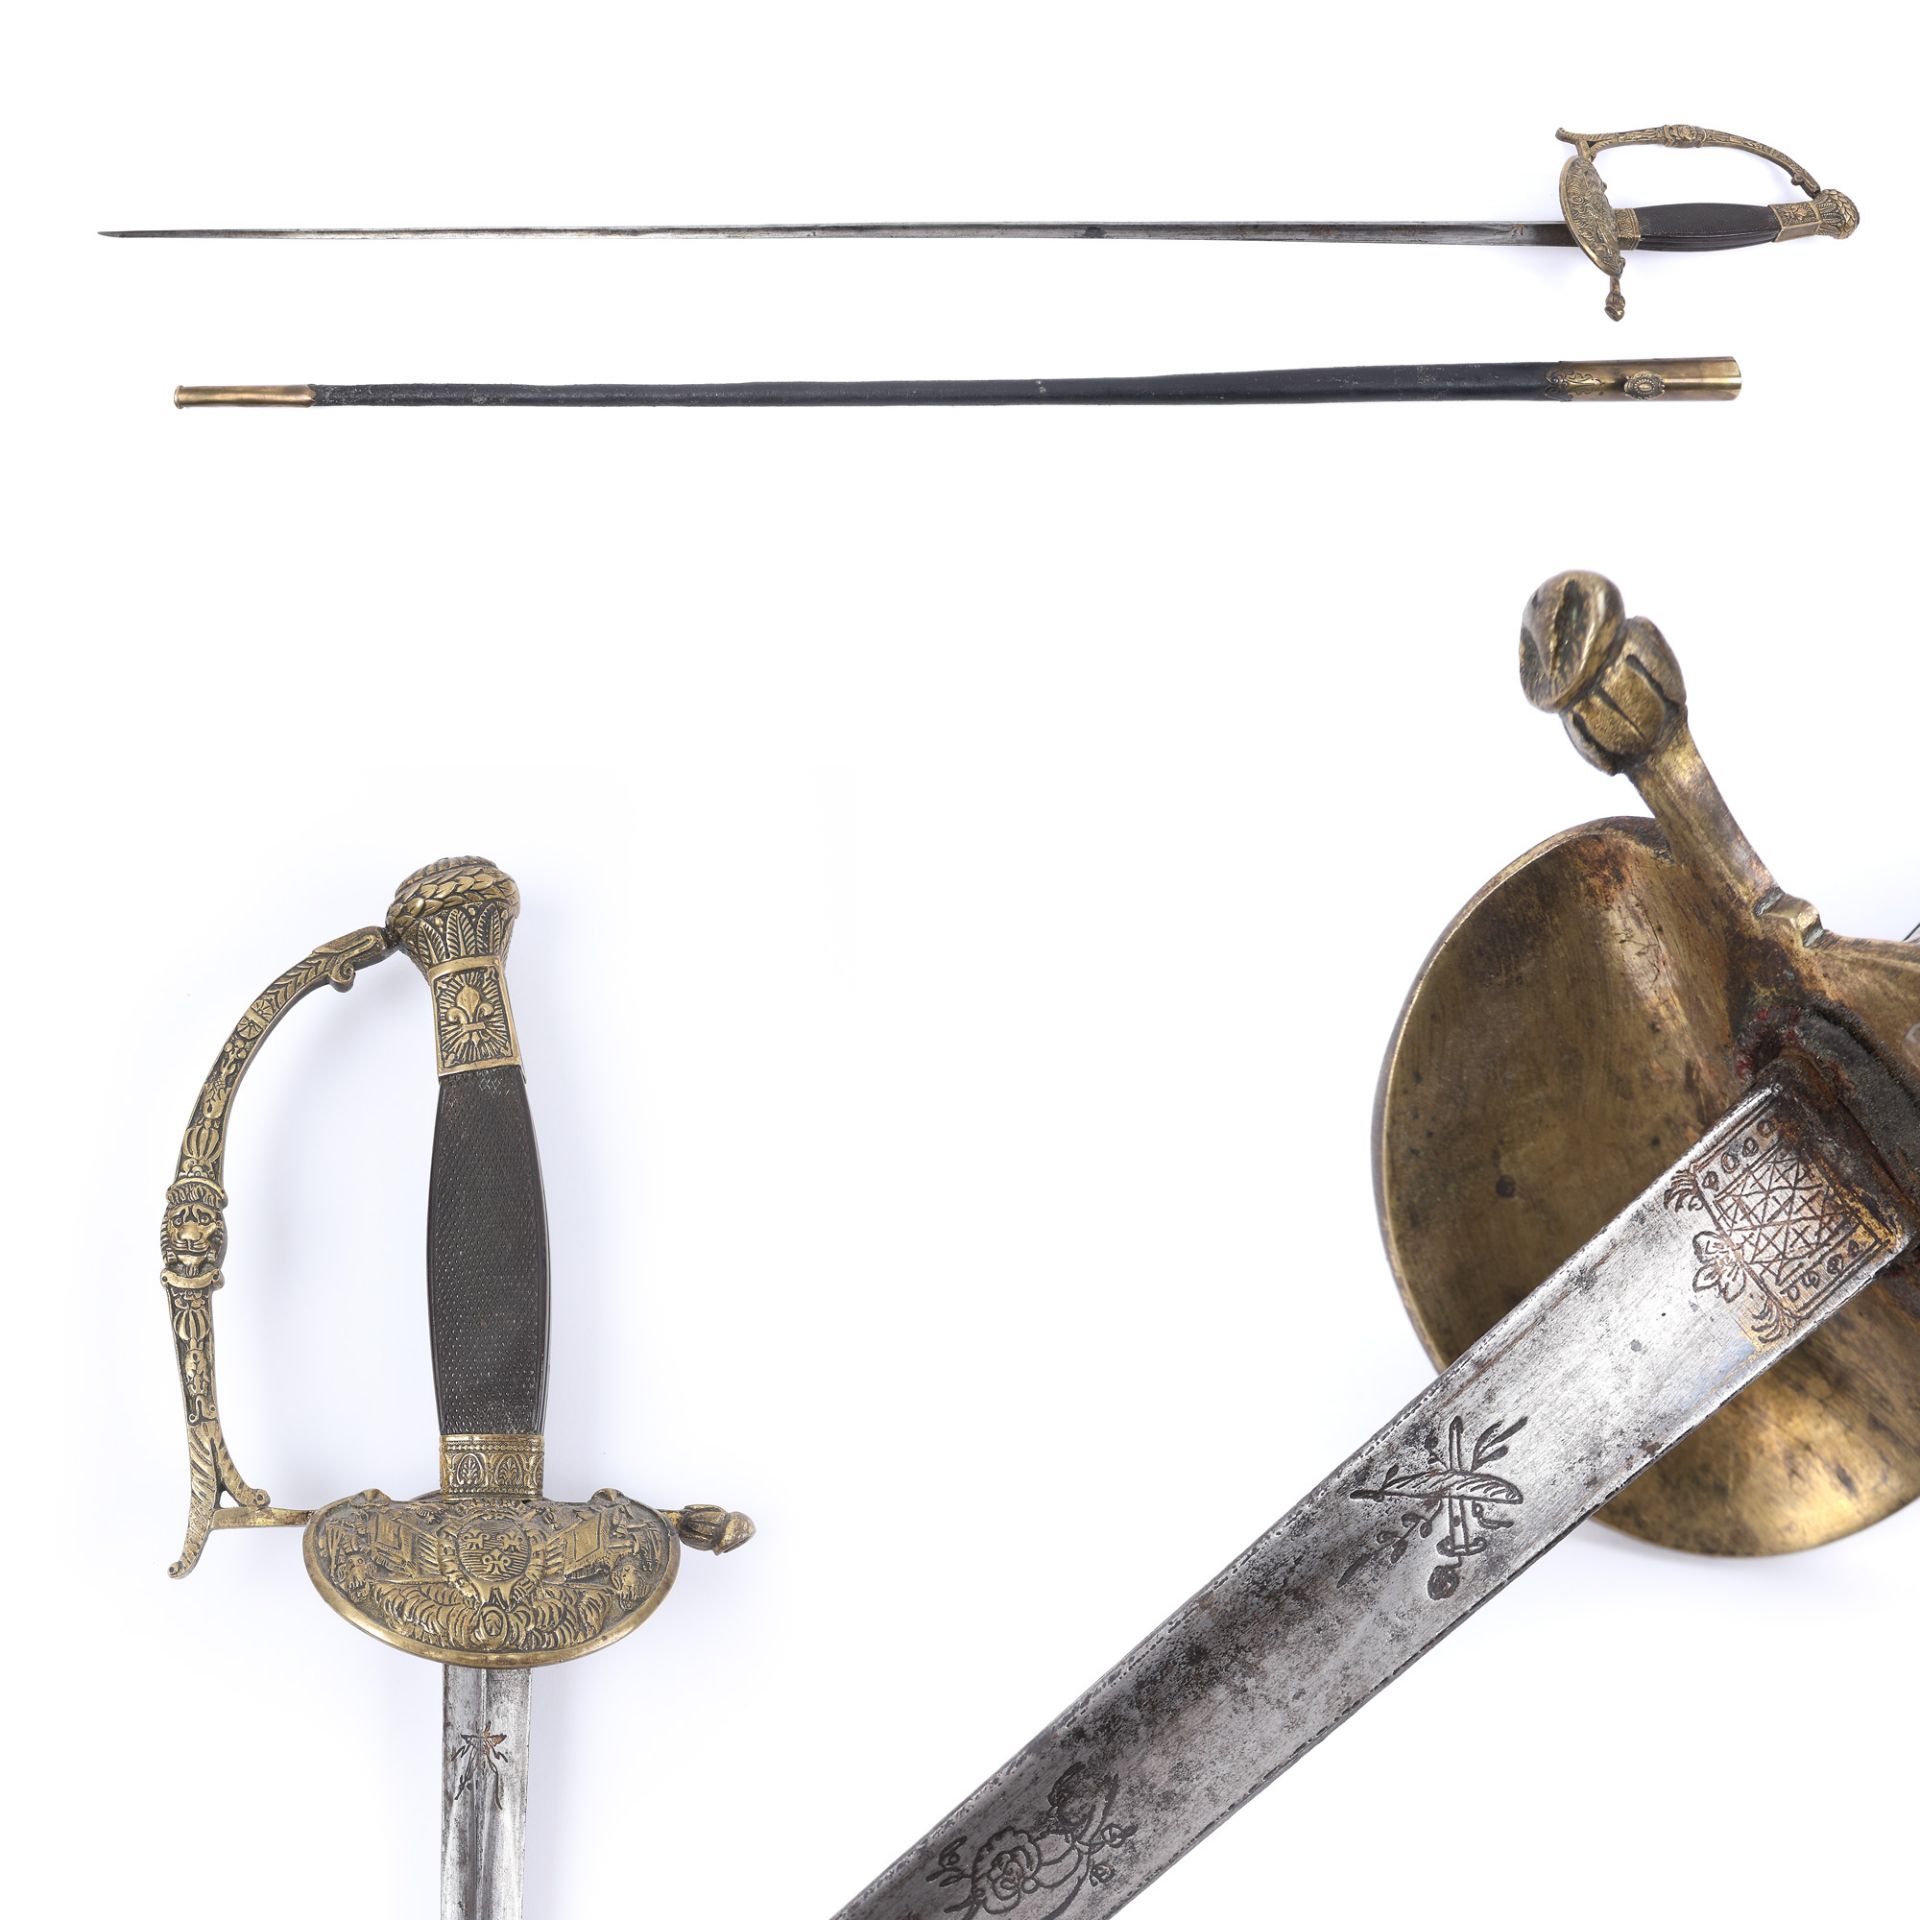 French officer's rapier, with triangular blade and sheath, Louis Philippe period, first half of the